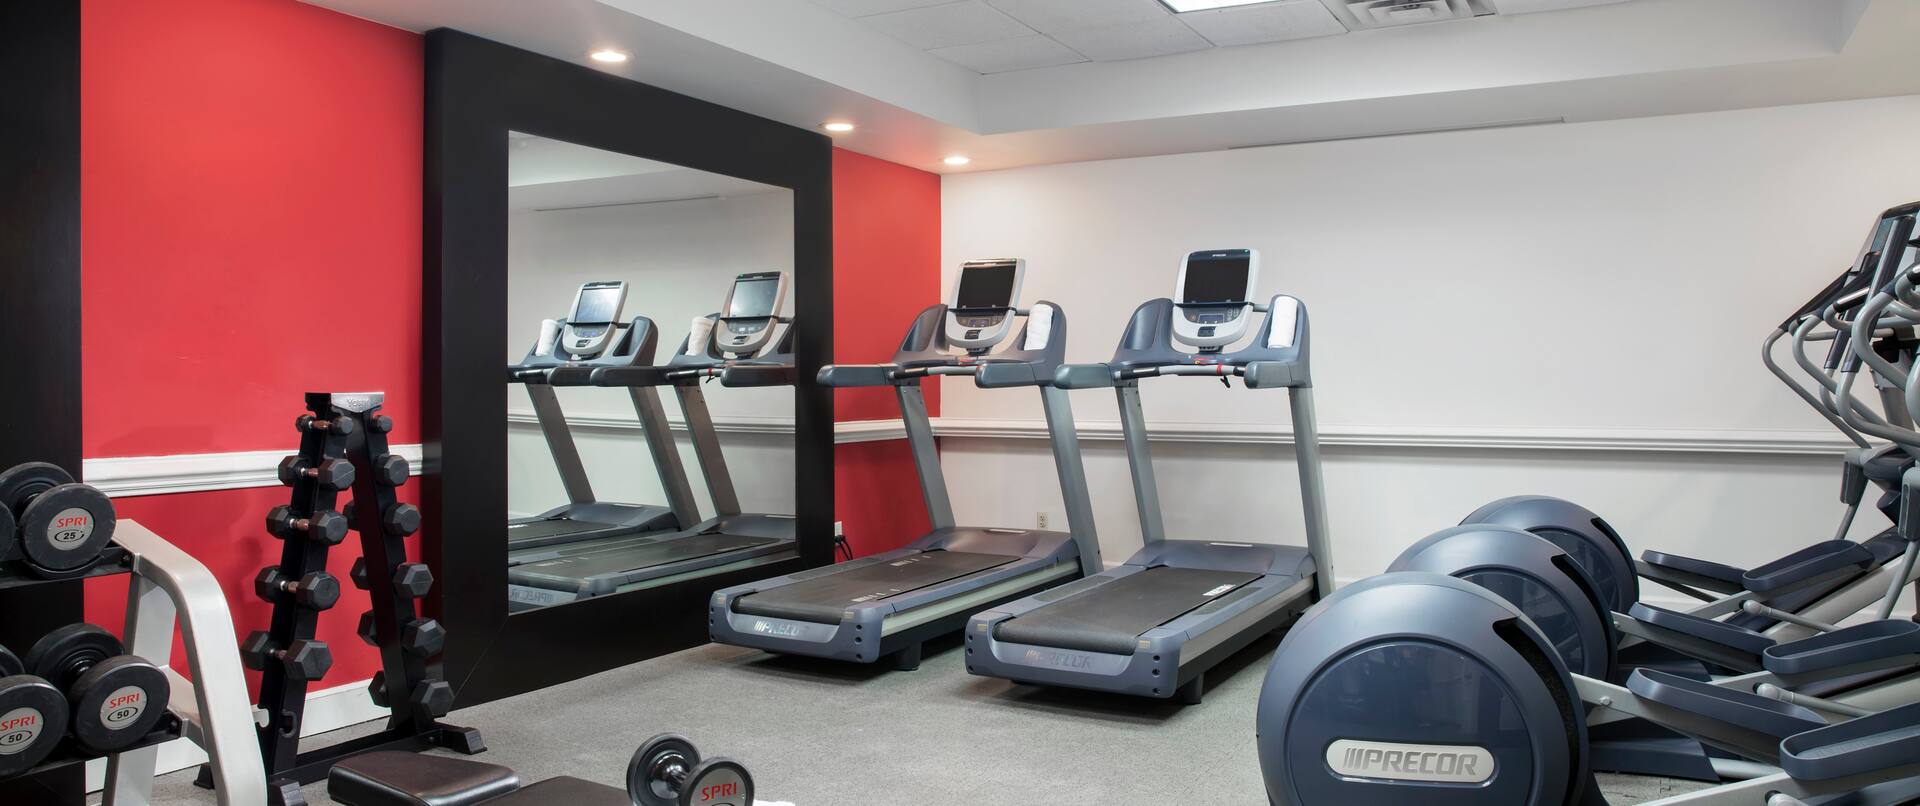 Fitness Center Treadmills, Cross-Trainers, Weight Bench and Dumbbell Rack